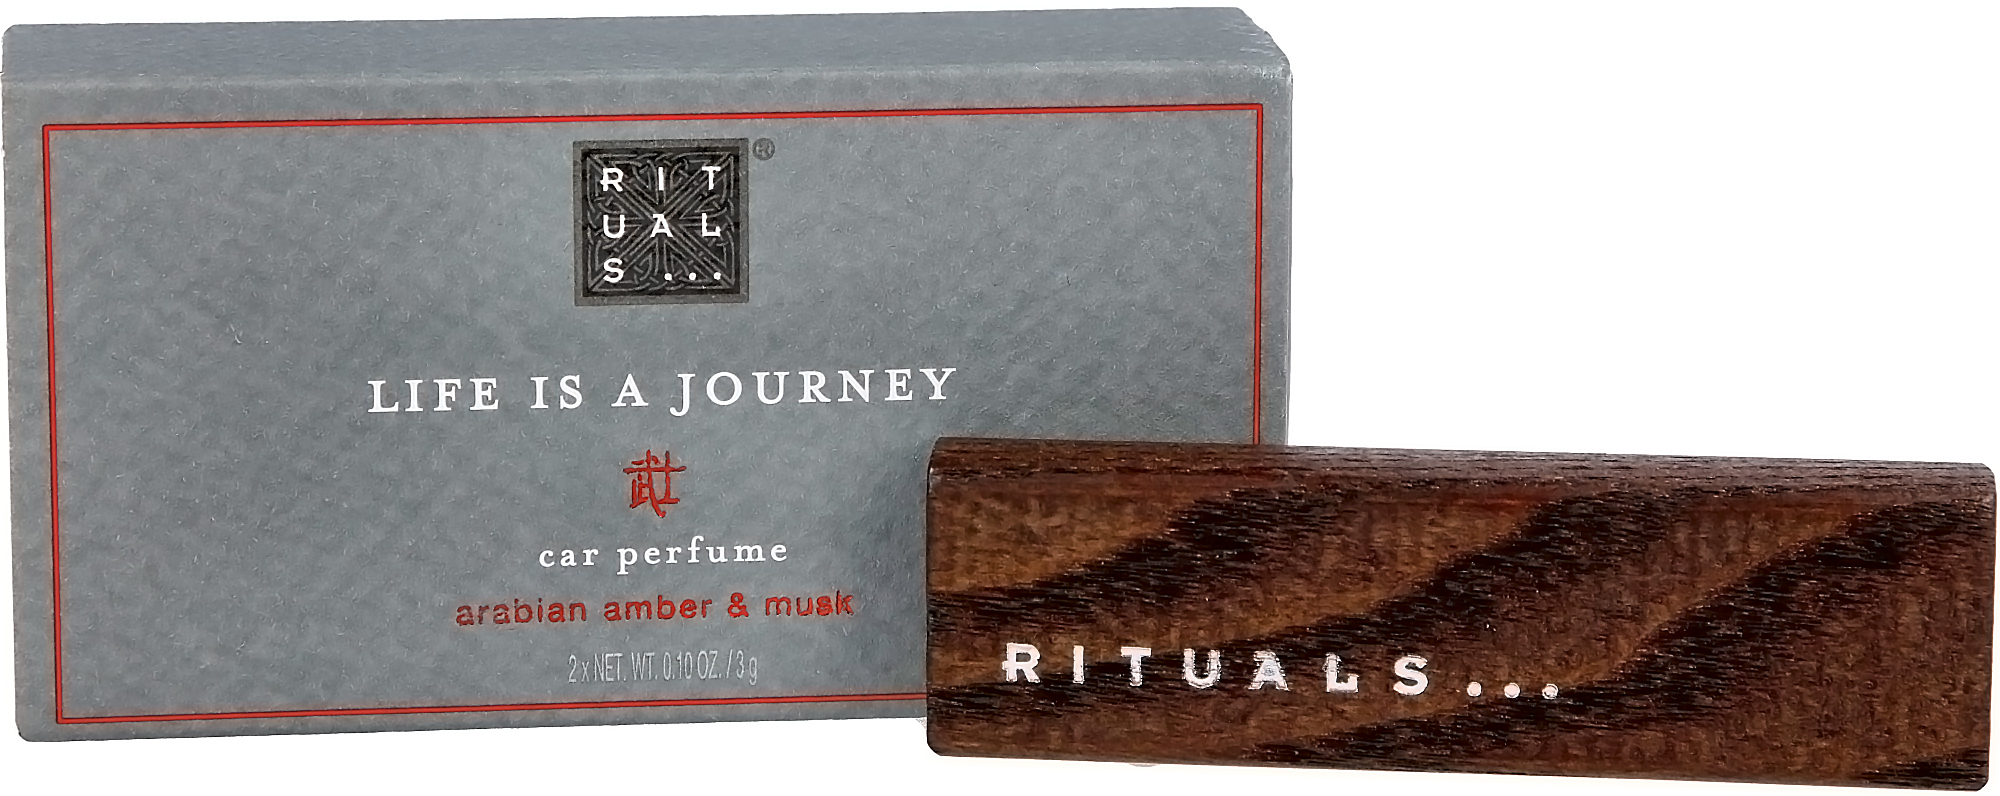 Rituals Home Fragrance Life is Journey Car Perfume | lyko.com